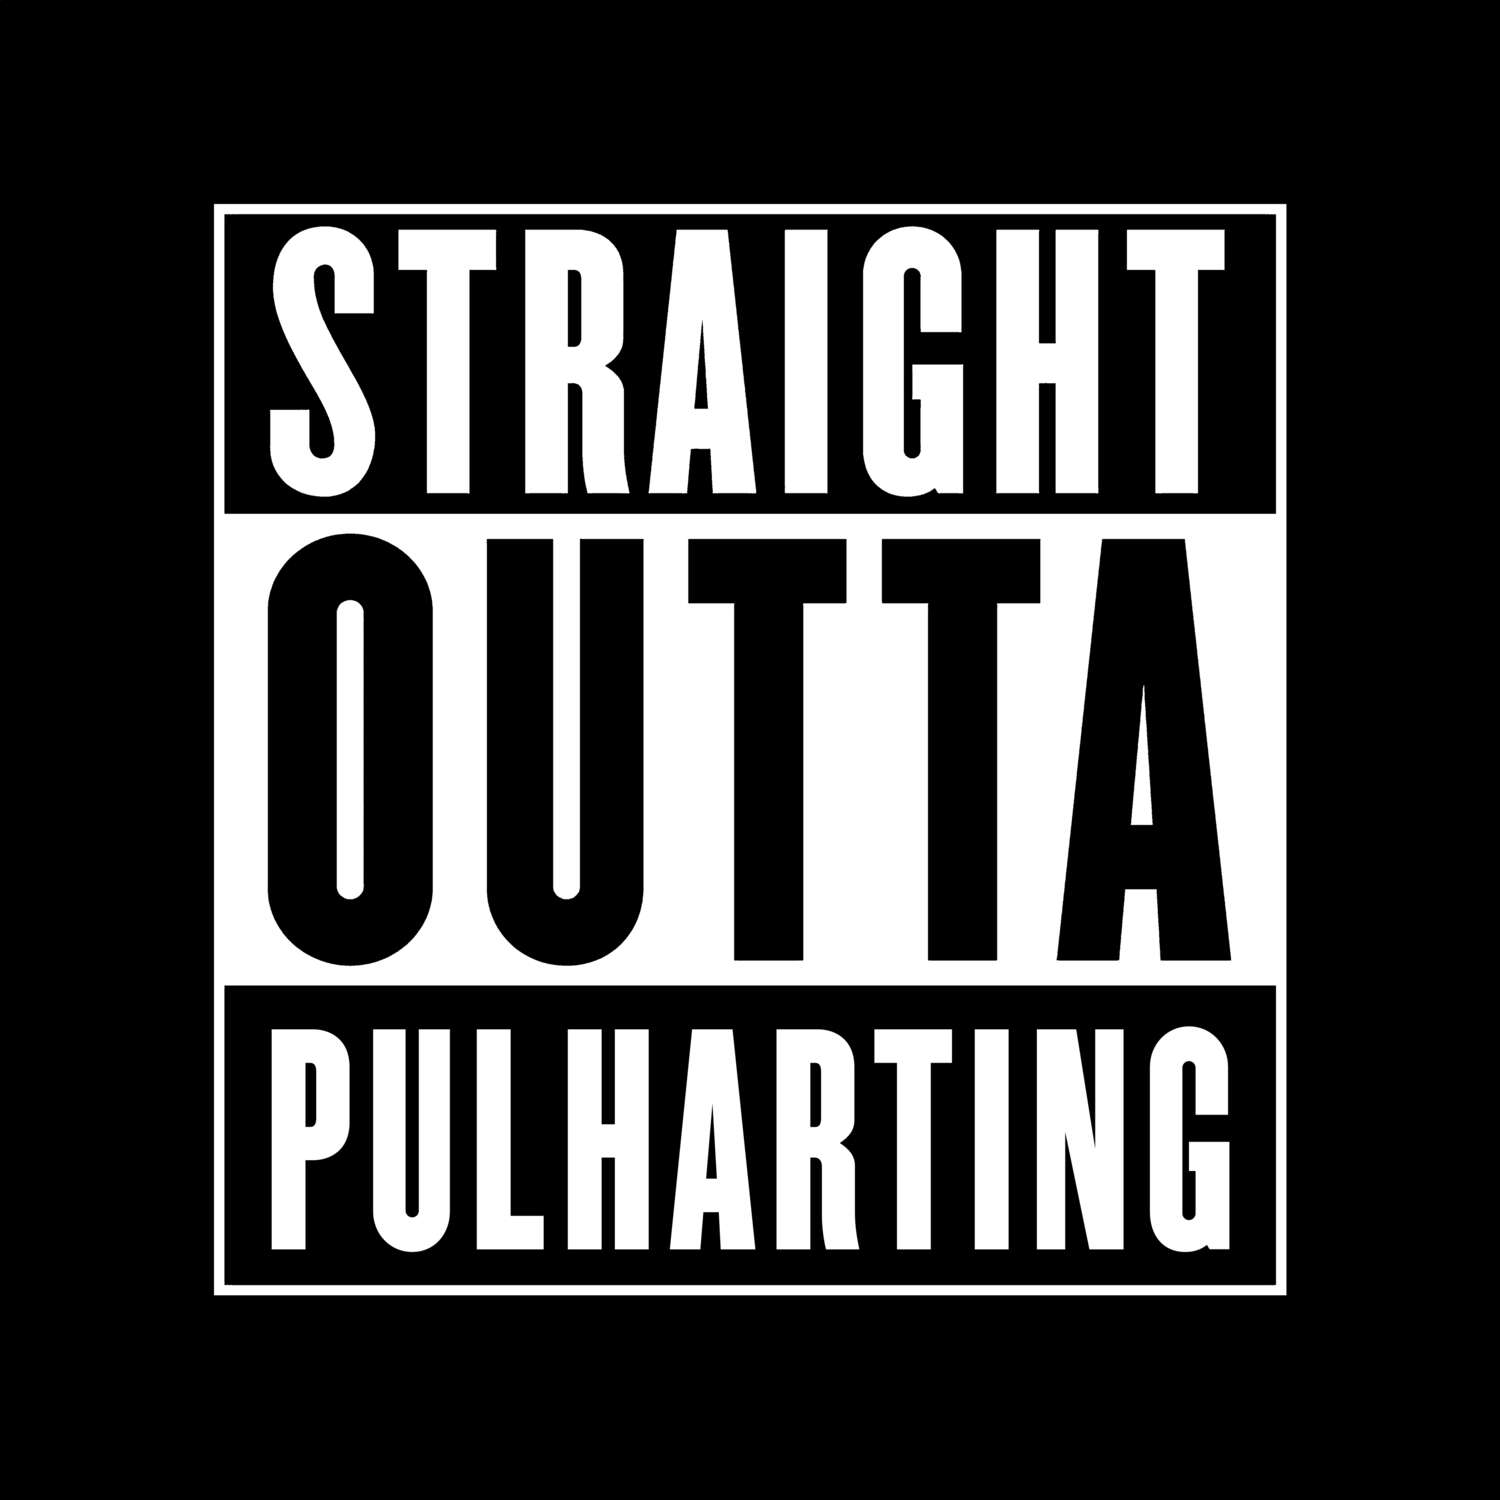 Pulharting T-Shirt »Straight Outta«